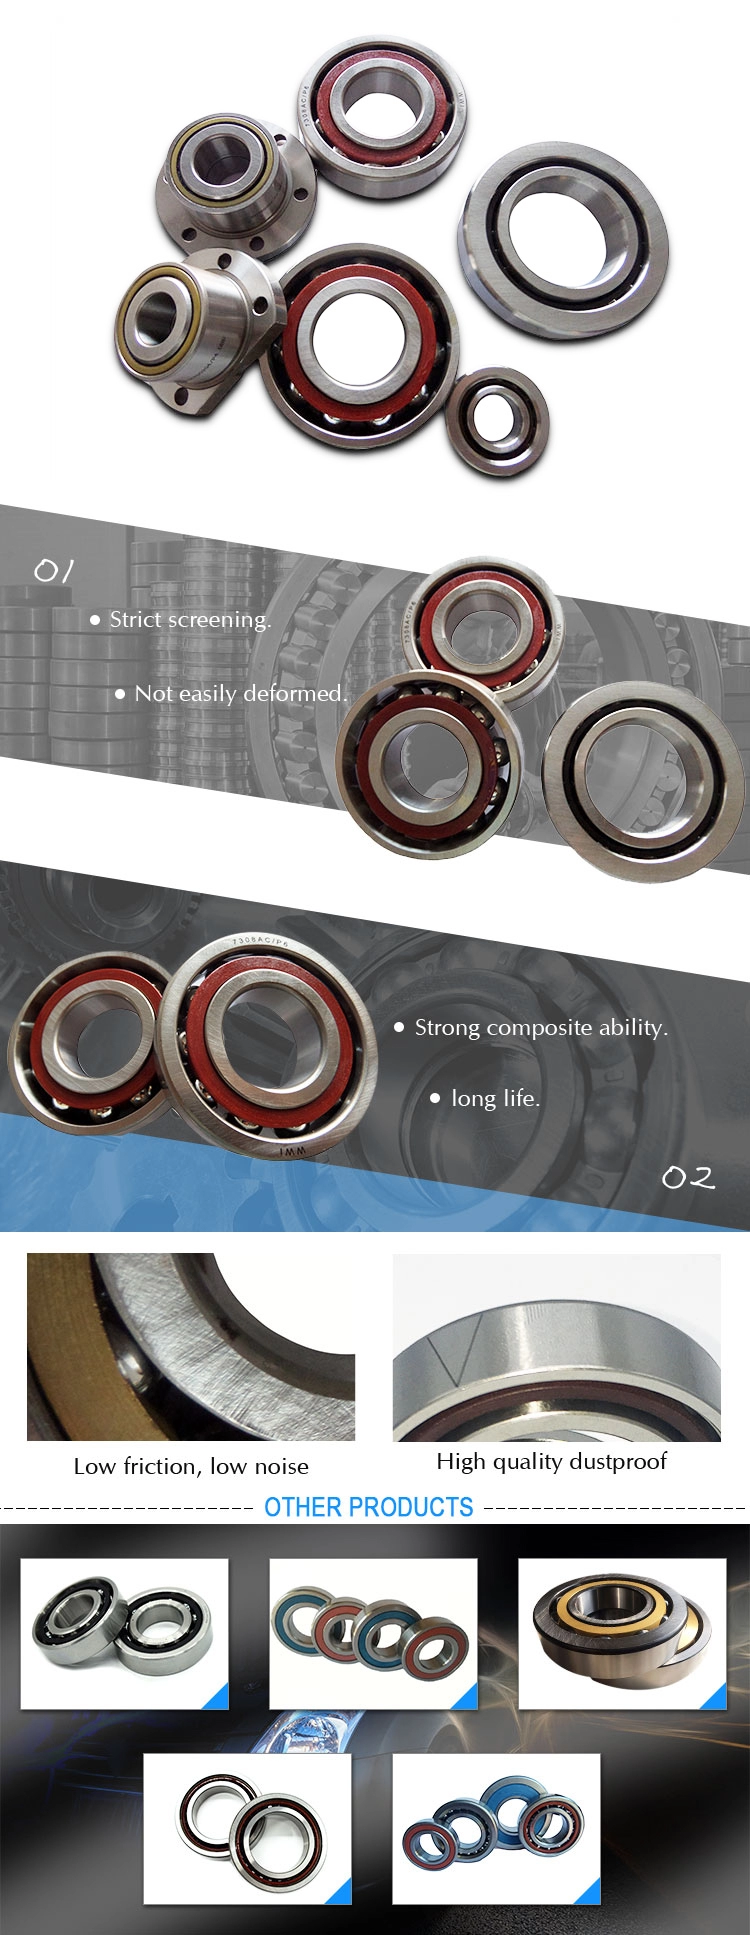 Waxing angular contact ball bearing catalogue low friction from best factory-2